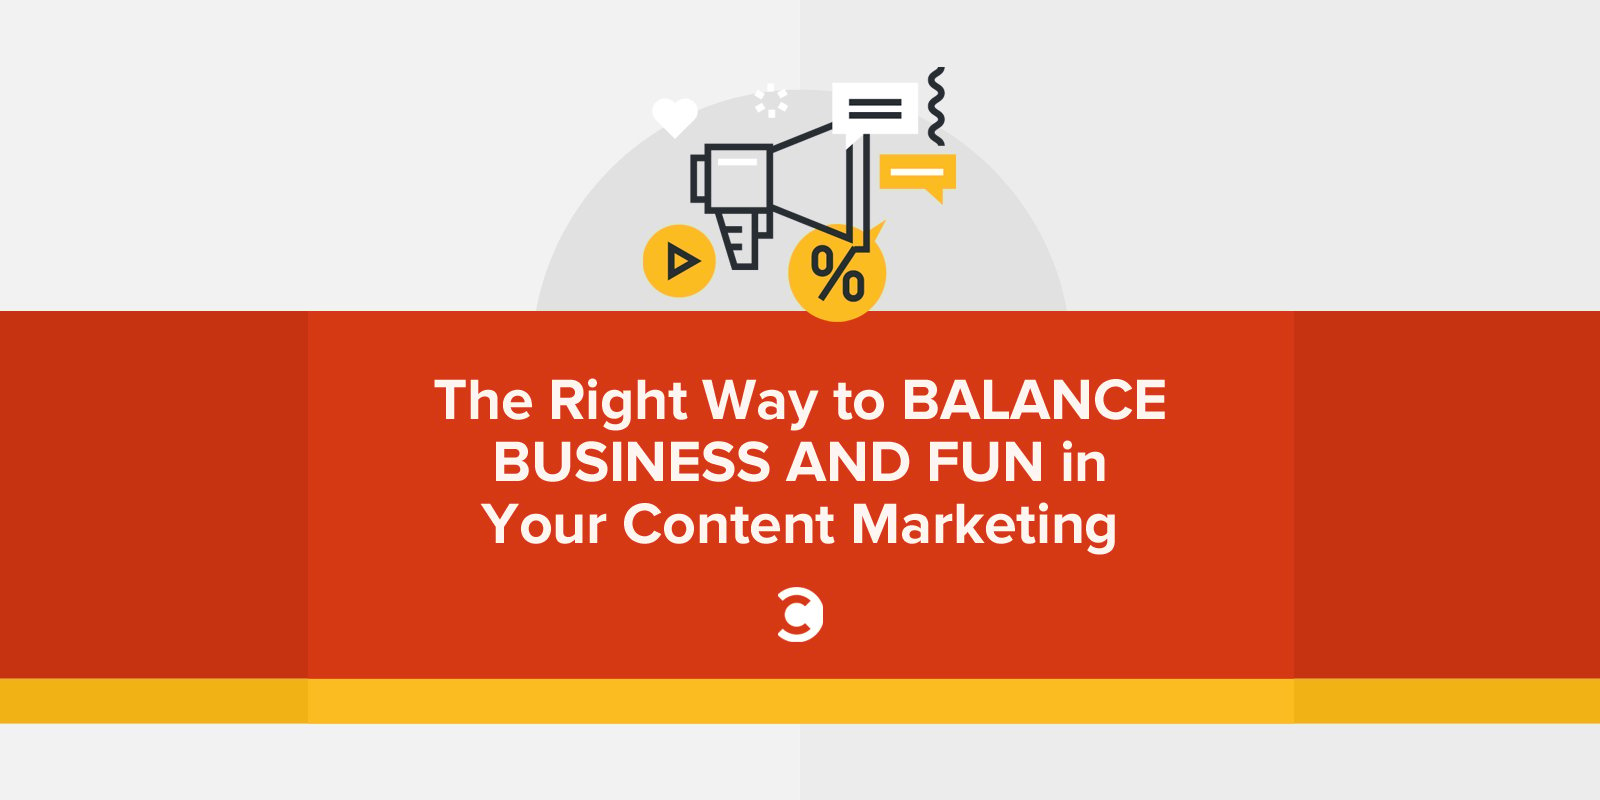 The Right Way to Balance Business and Fun in Your Content Marketing